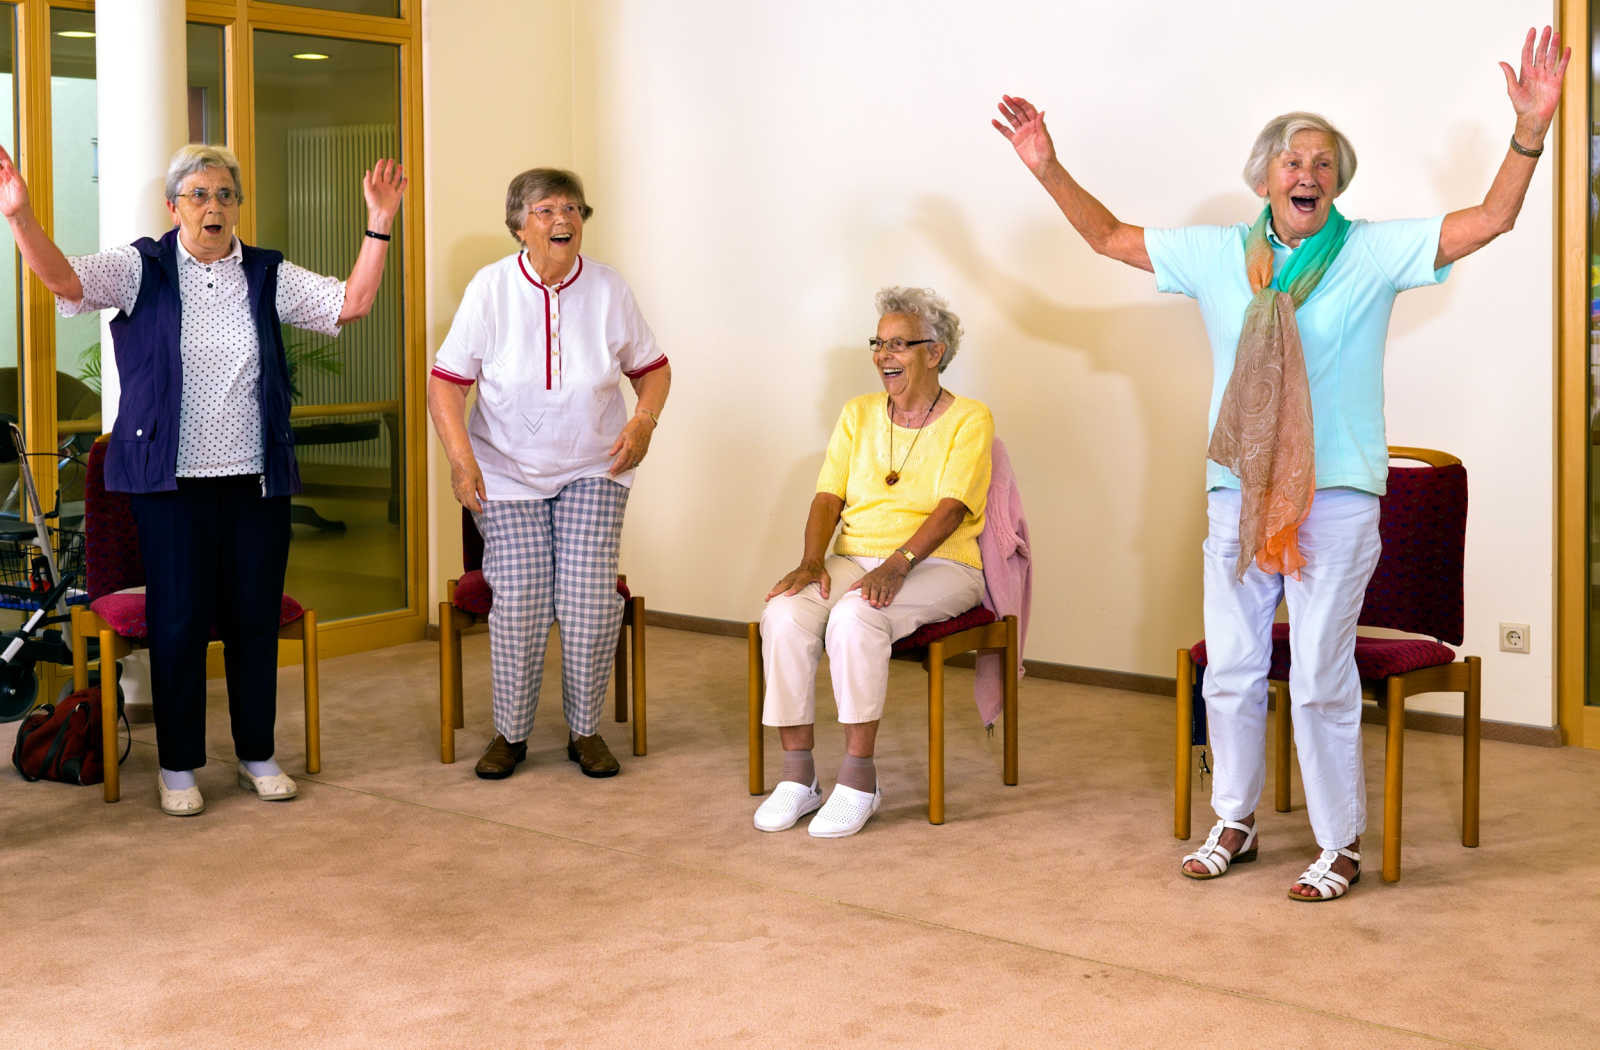 A group of senior women smiling and exercising together in a senior living community.